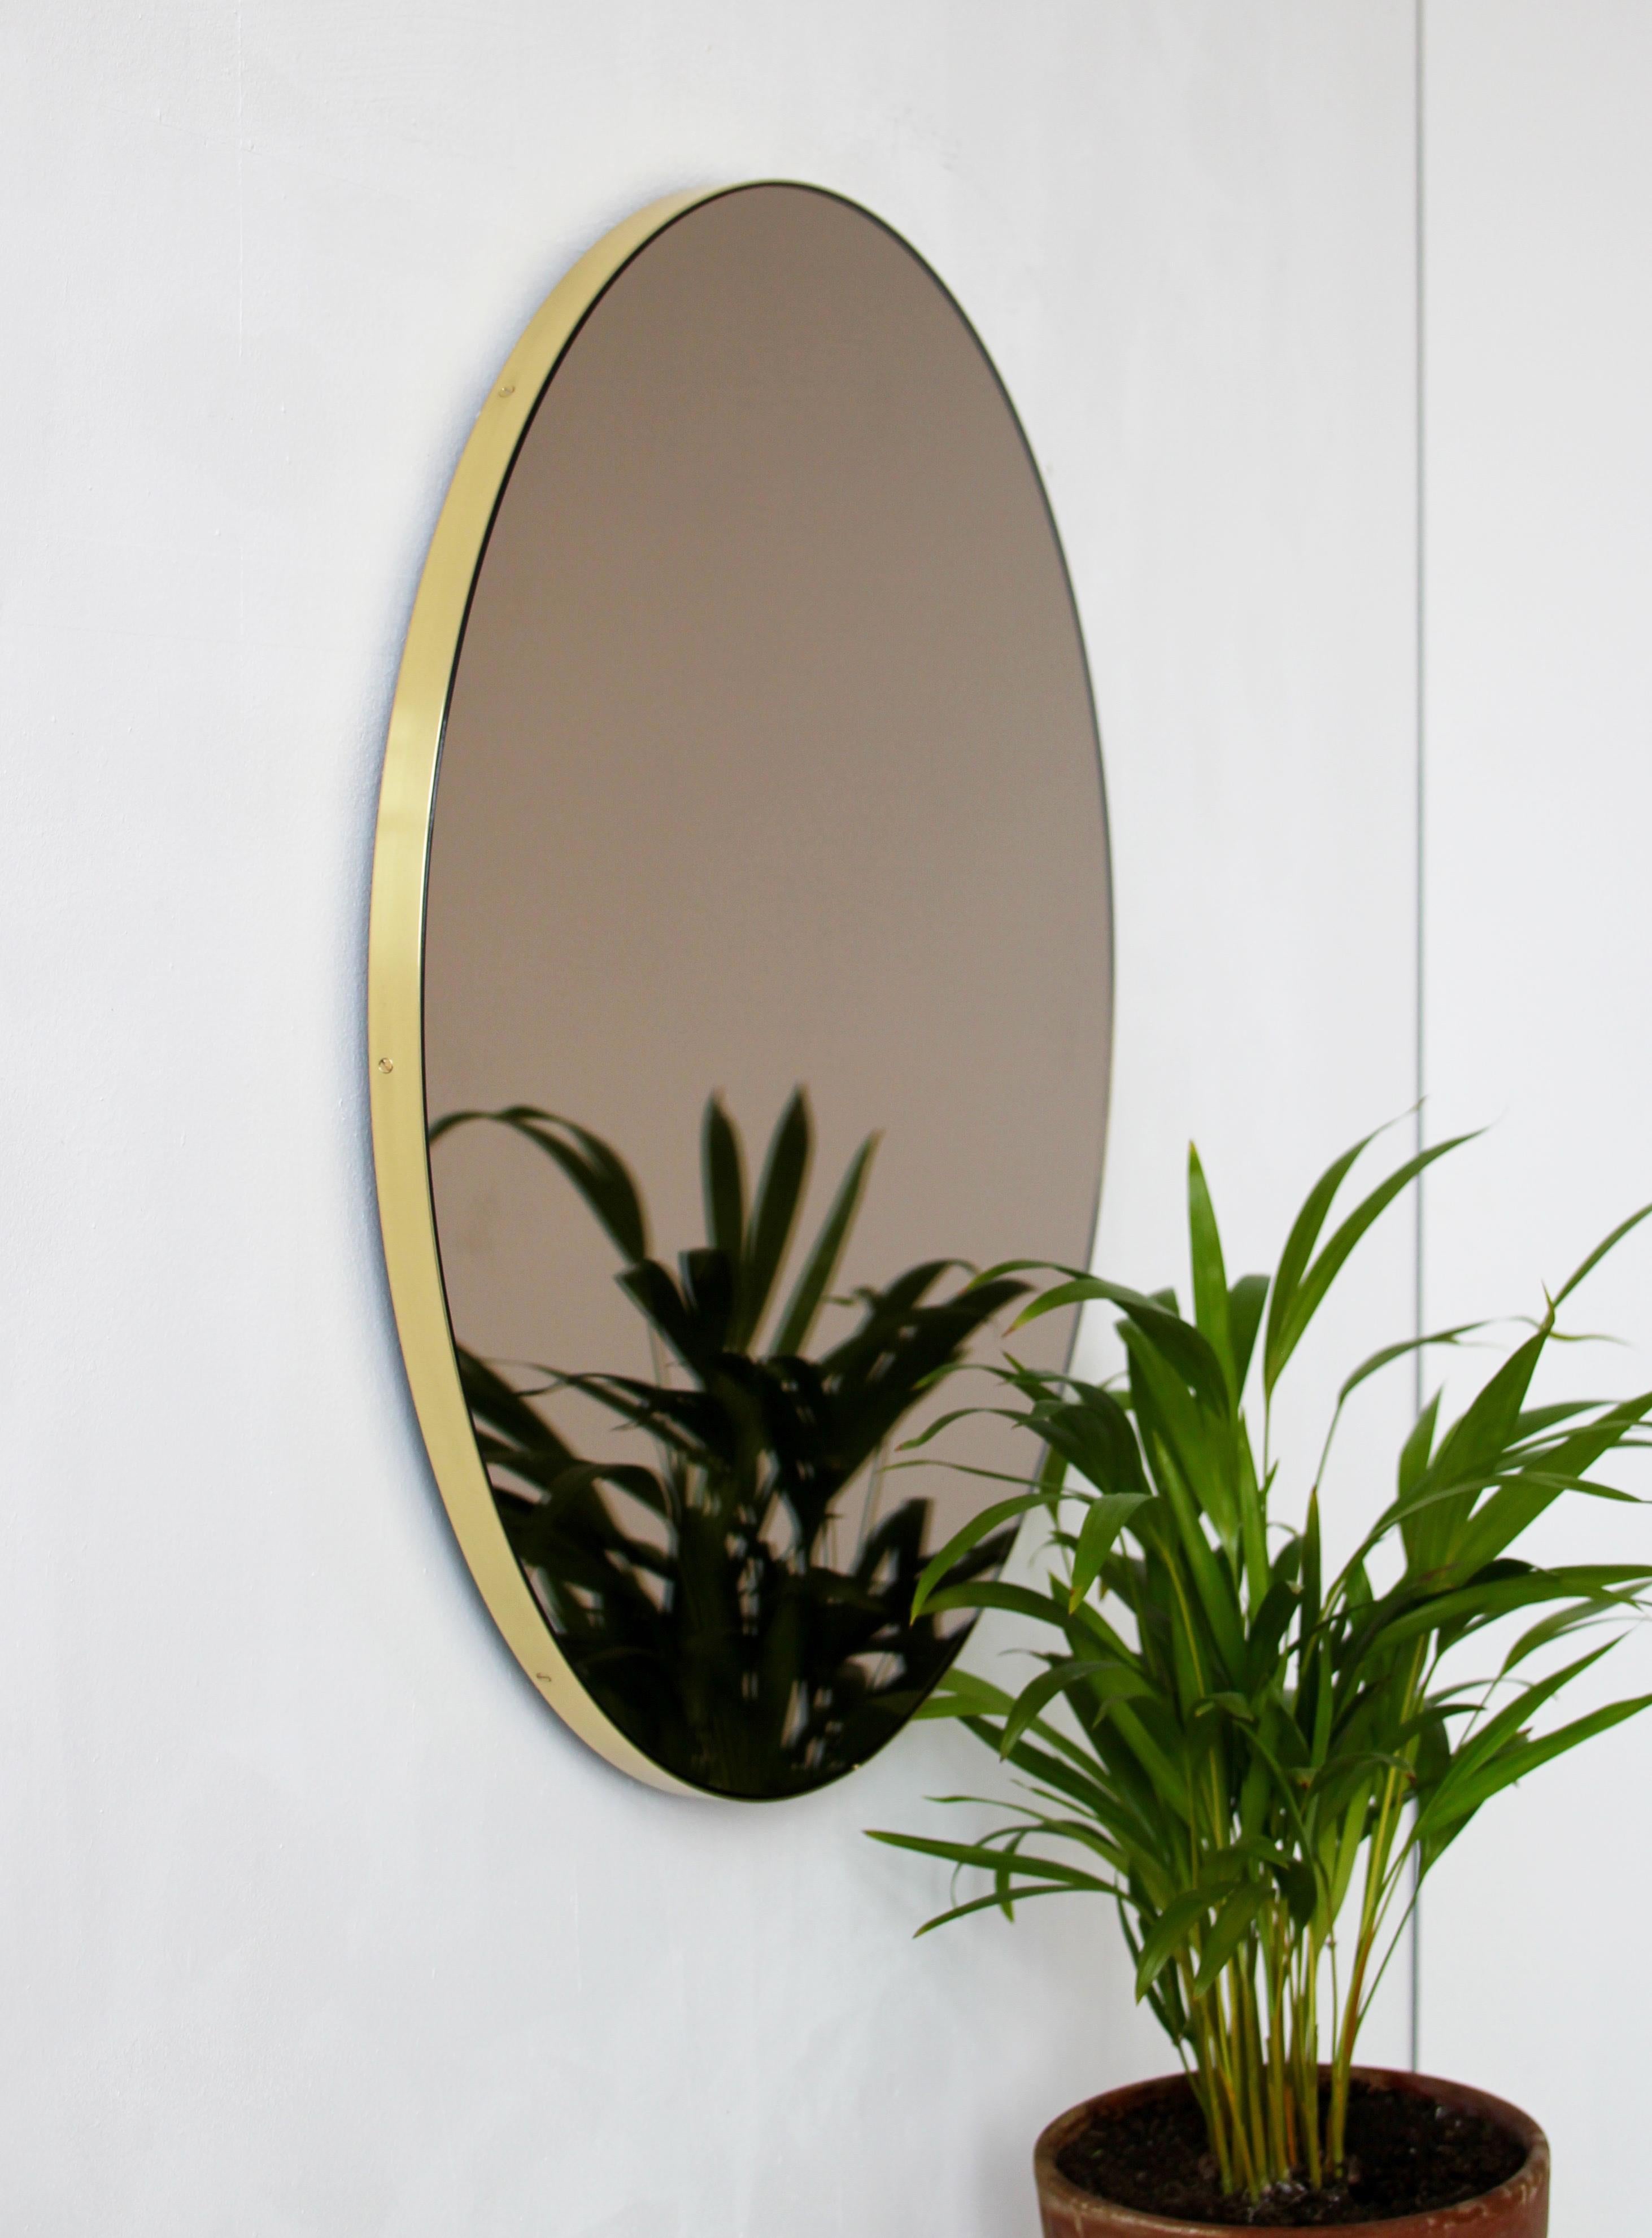 Minimalist bronze tinted round mirror with an elegant brushed brass frame. The detailing and finish, including visible brass screws, emphasize the crafty and quality feel of the mirror, a true signature of our brand. Designed and handcrafted in